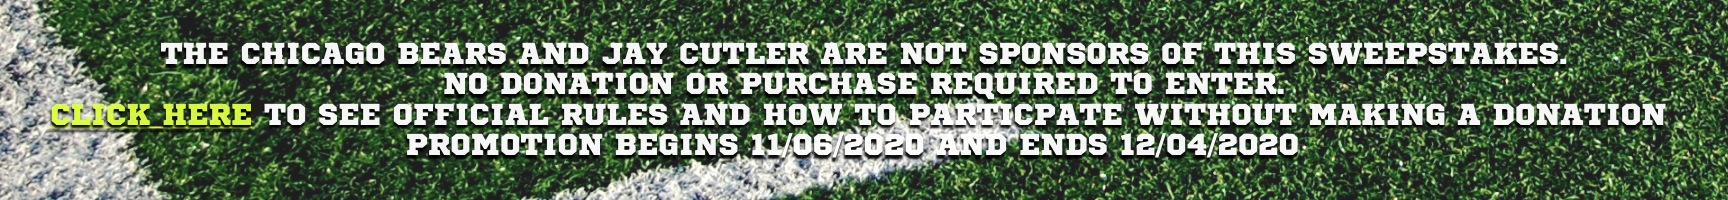 Picture reads the Chicago Bears and Jay Cutler are not sponsors of this sweepstakes. No donation or purchase required to enter. Click here to see official rules and how to participate without making a donation promotion begins 11/06/2020 and ends 12/04/2020